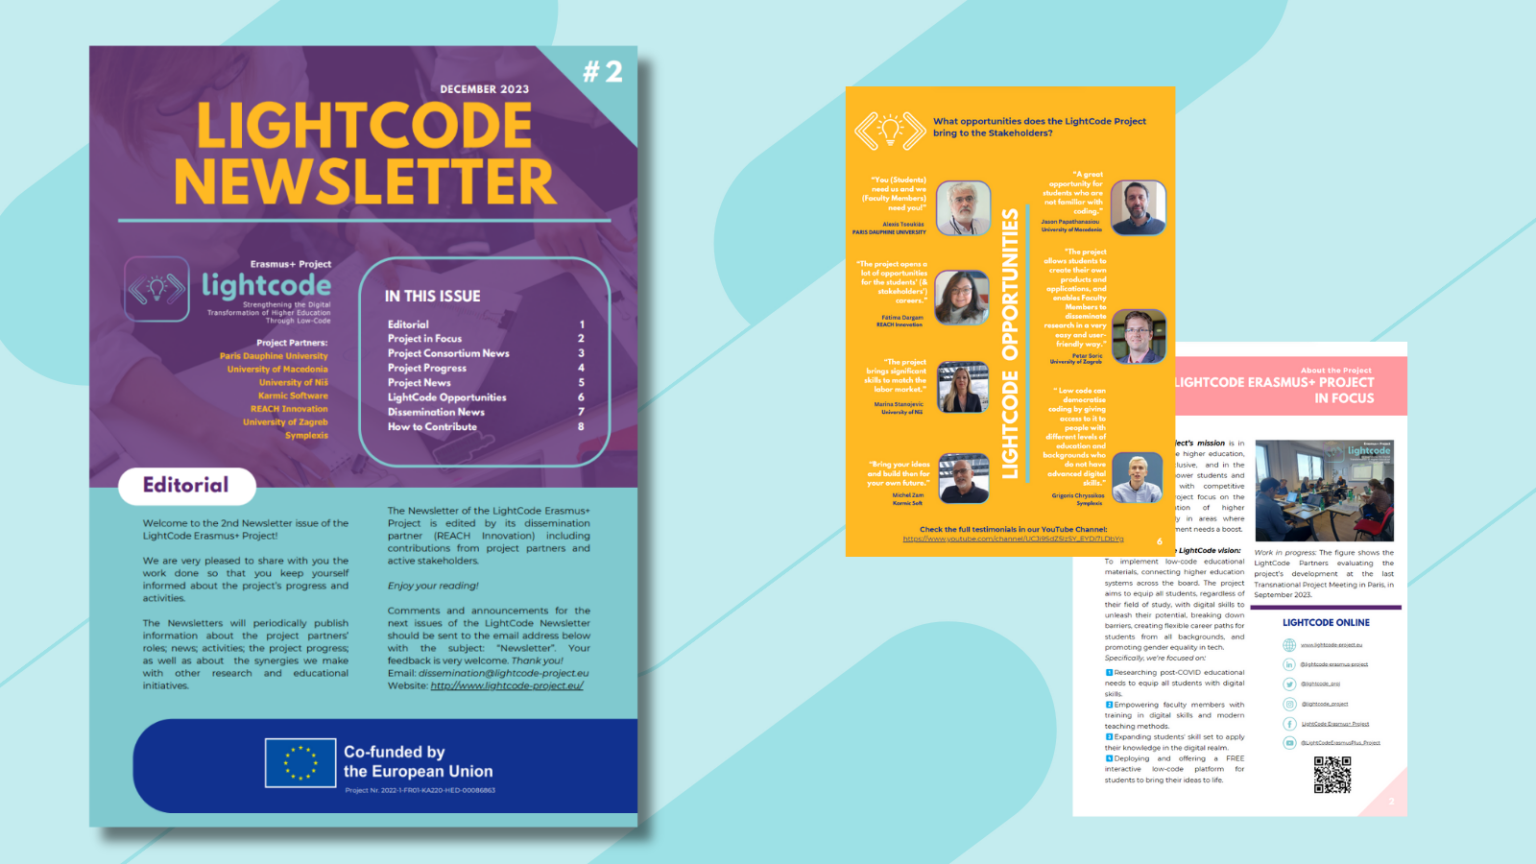 The picture shows the cover and 2 pages of the second Newsletter of the LightCode project.